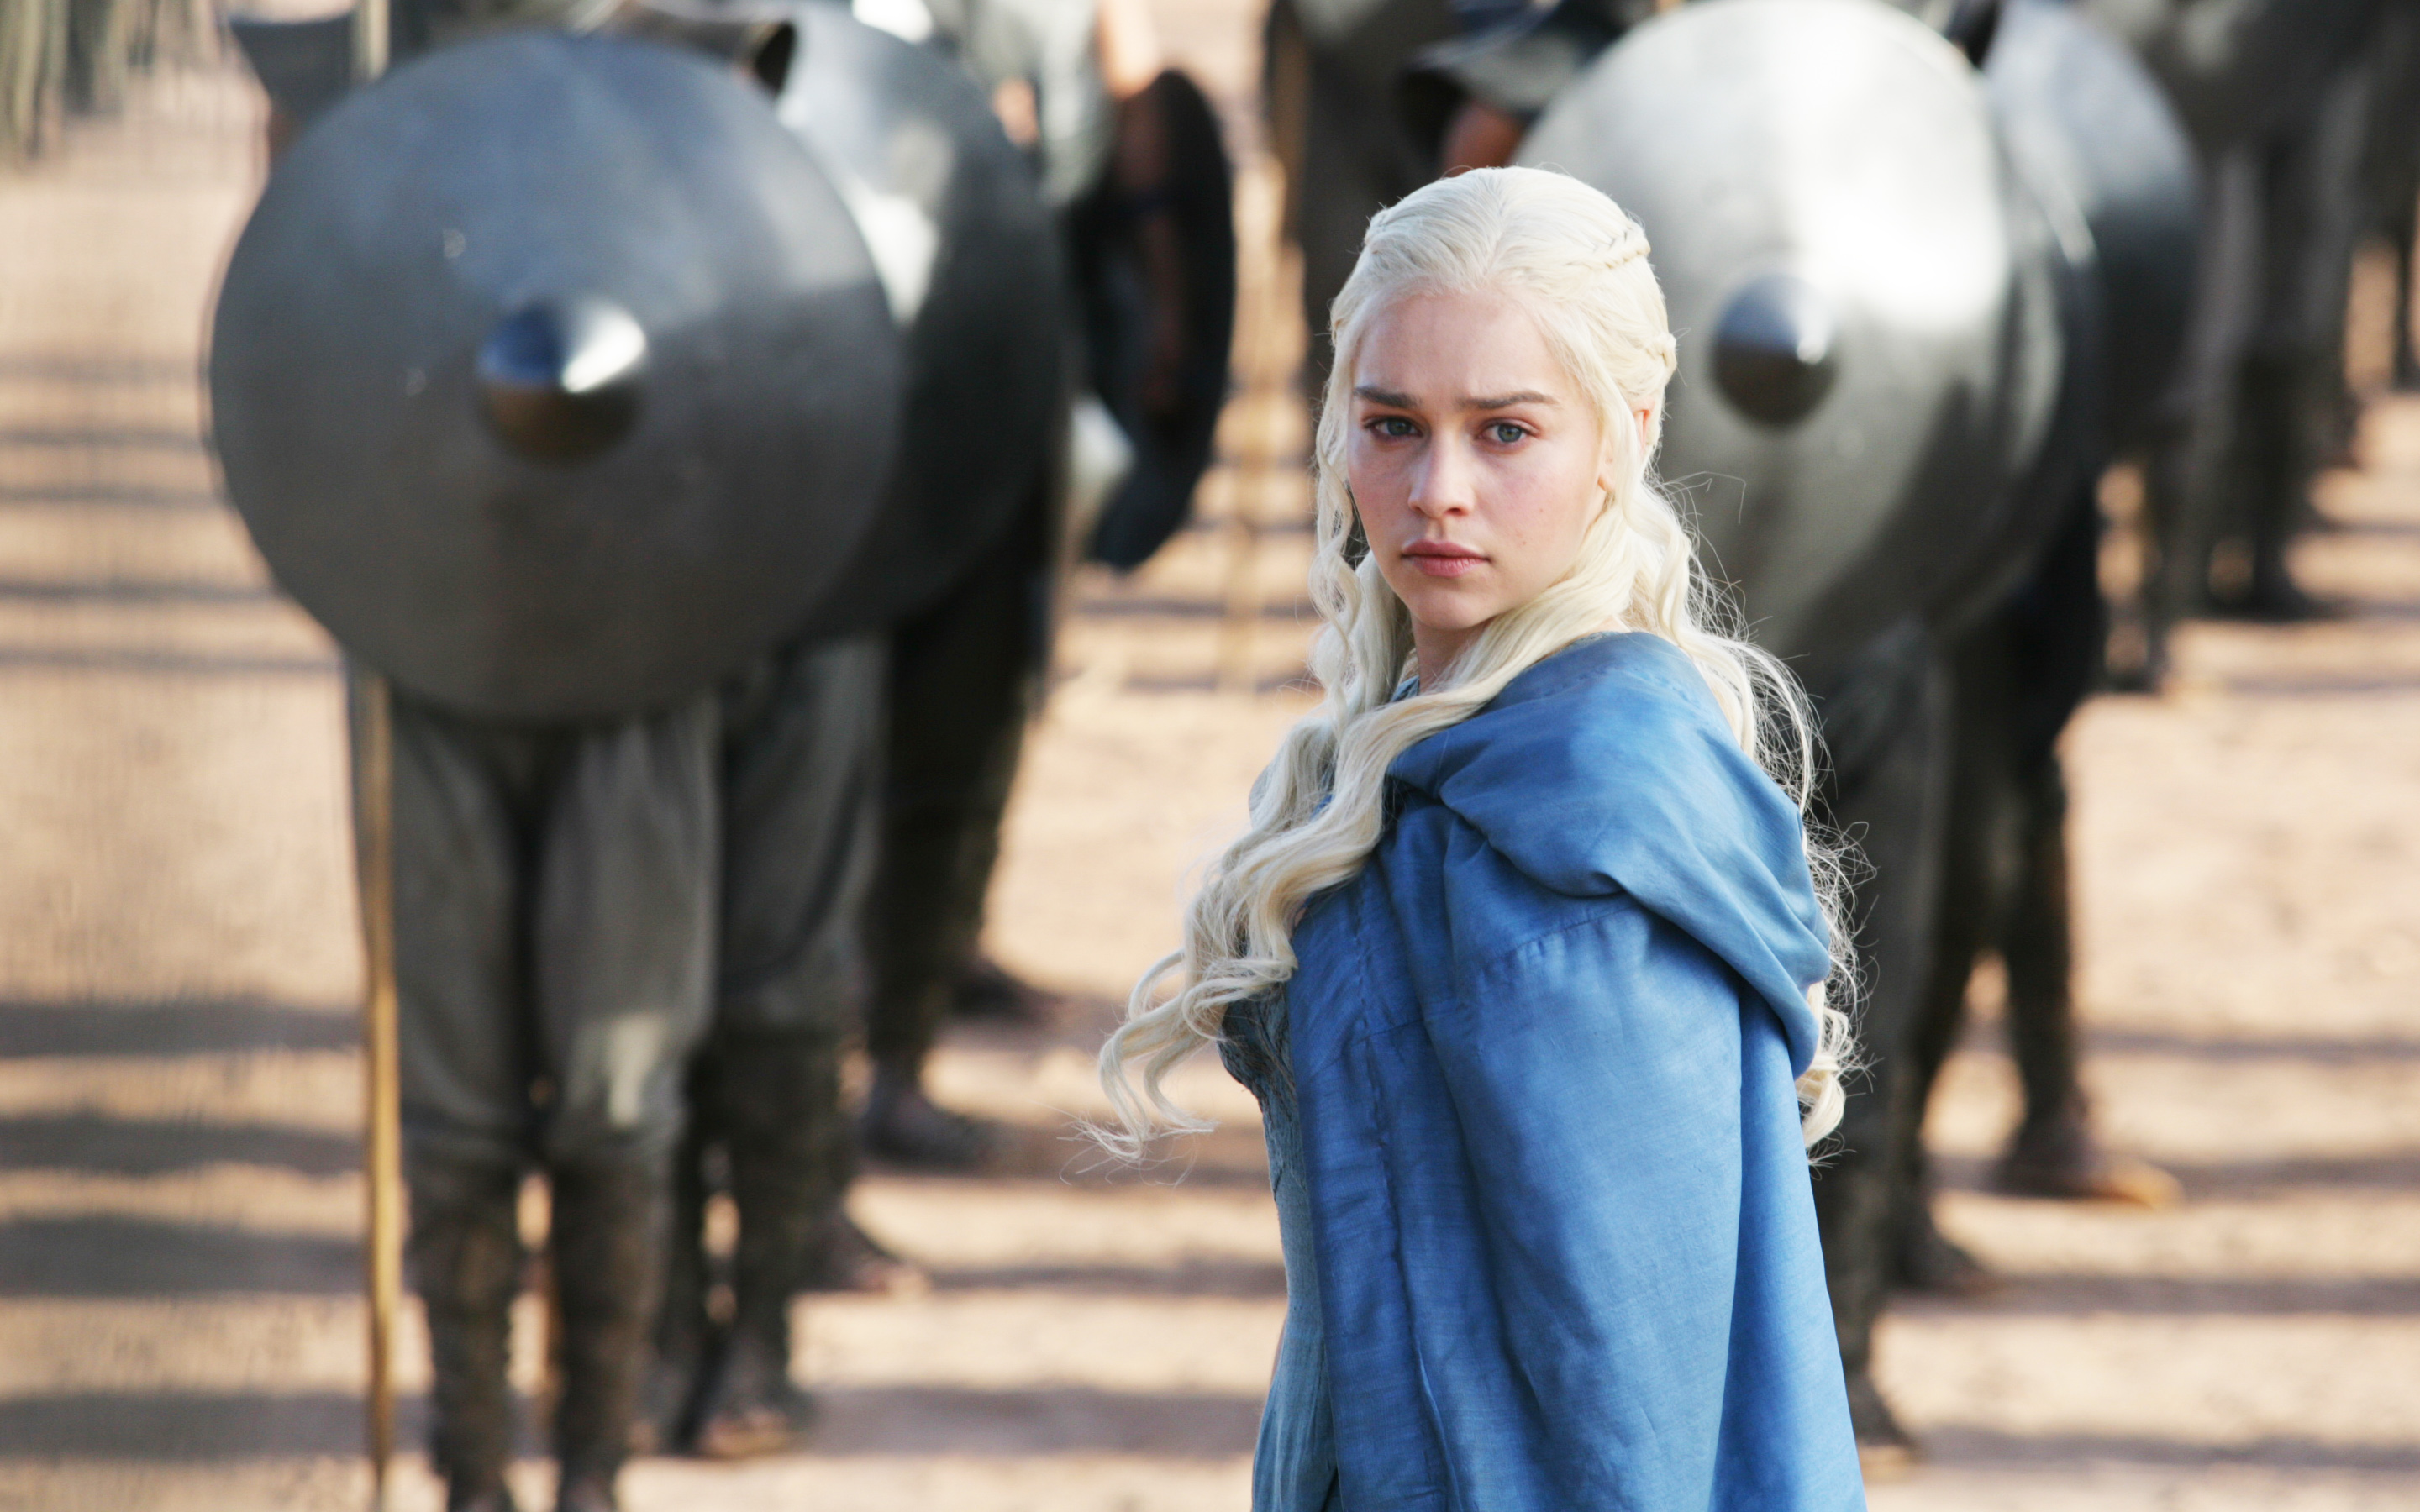 Emilia Clarke In Game Of Thrones Game Of Thrones Hd Images Emilia Clarke 2880x1800 Wallpaper Teahub Io,What A Beautiful Name Piano Sheet Music